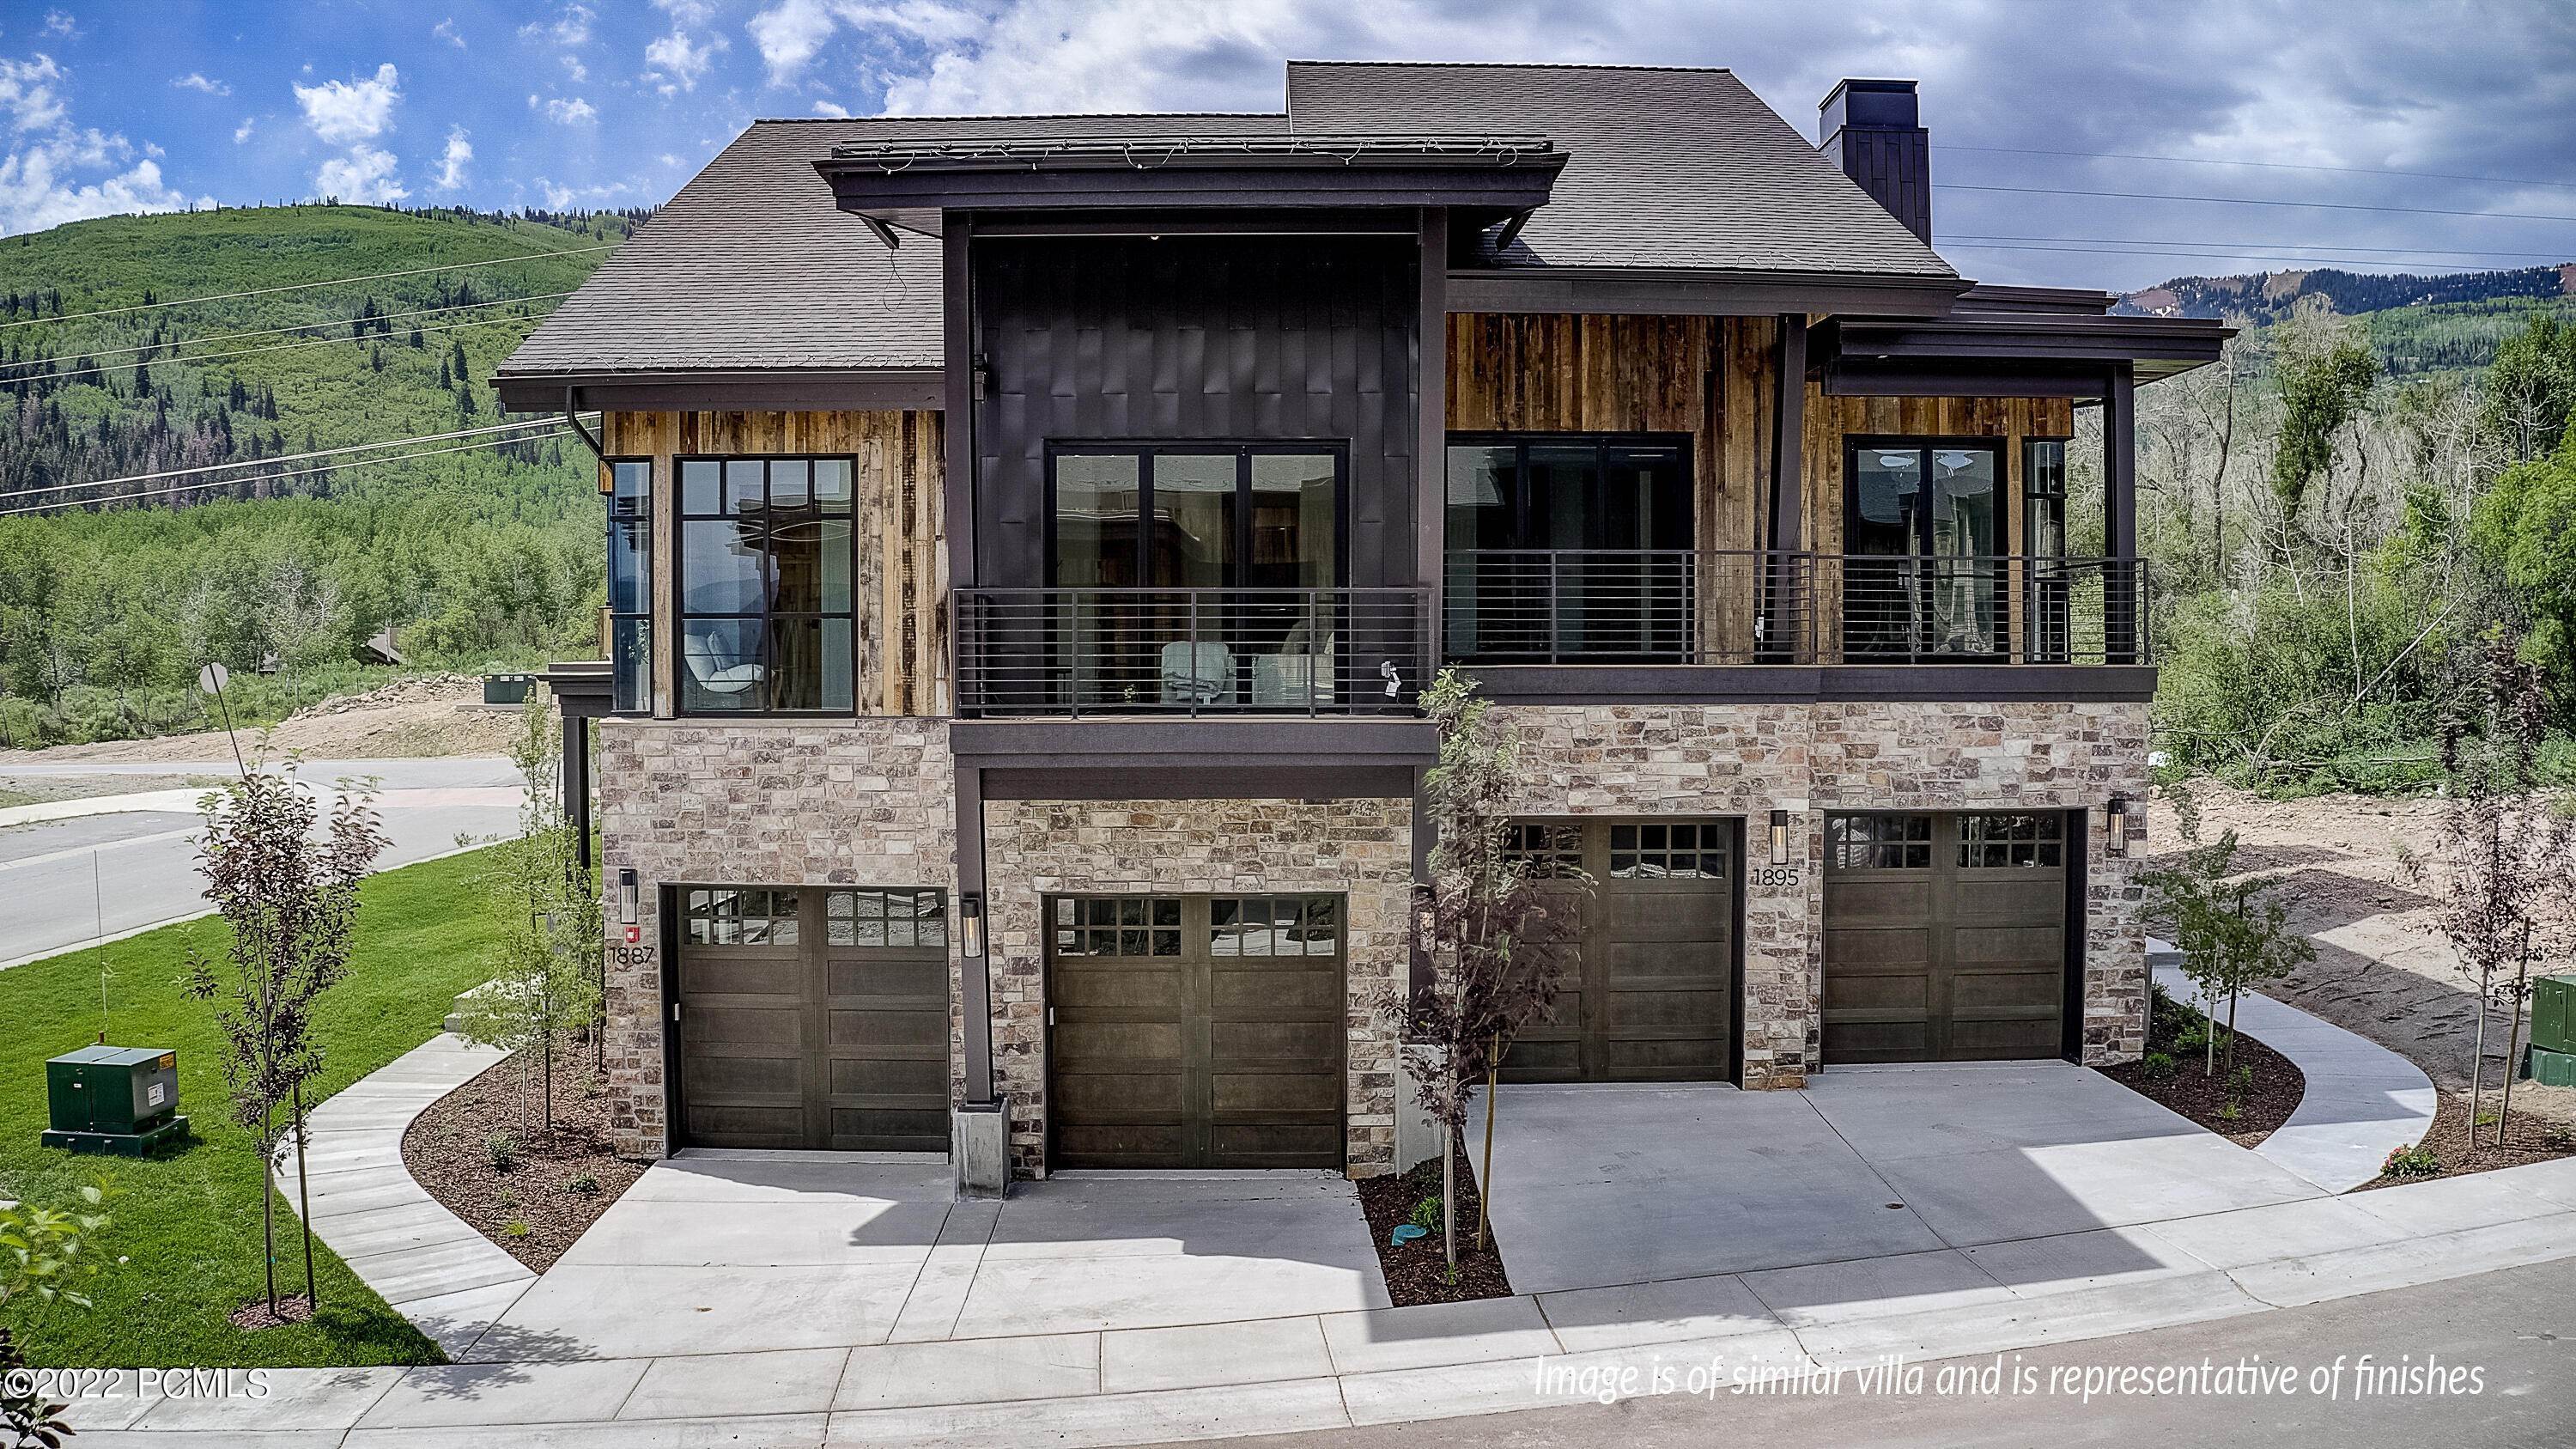 15. Townhouse at 1925 Stone Hollow Road Park City, Utah 84098 United States